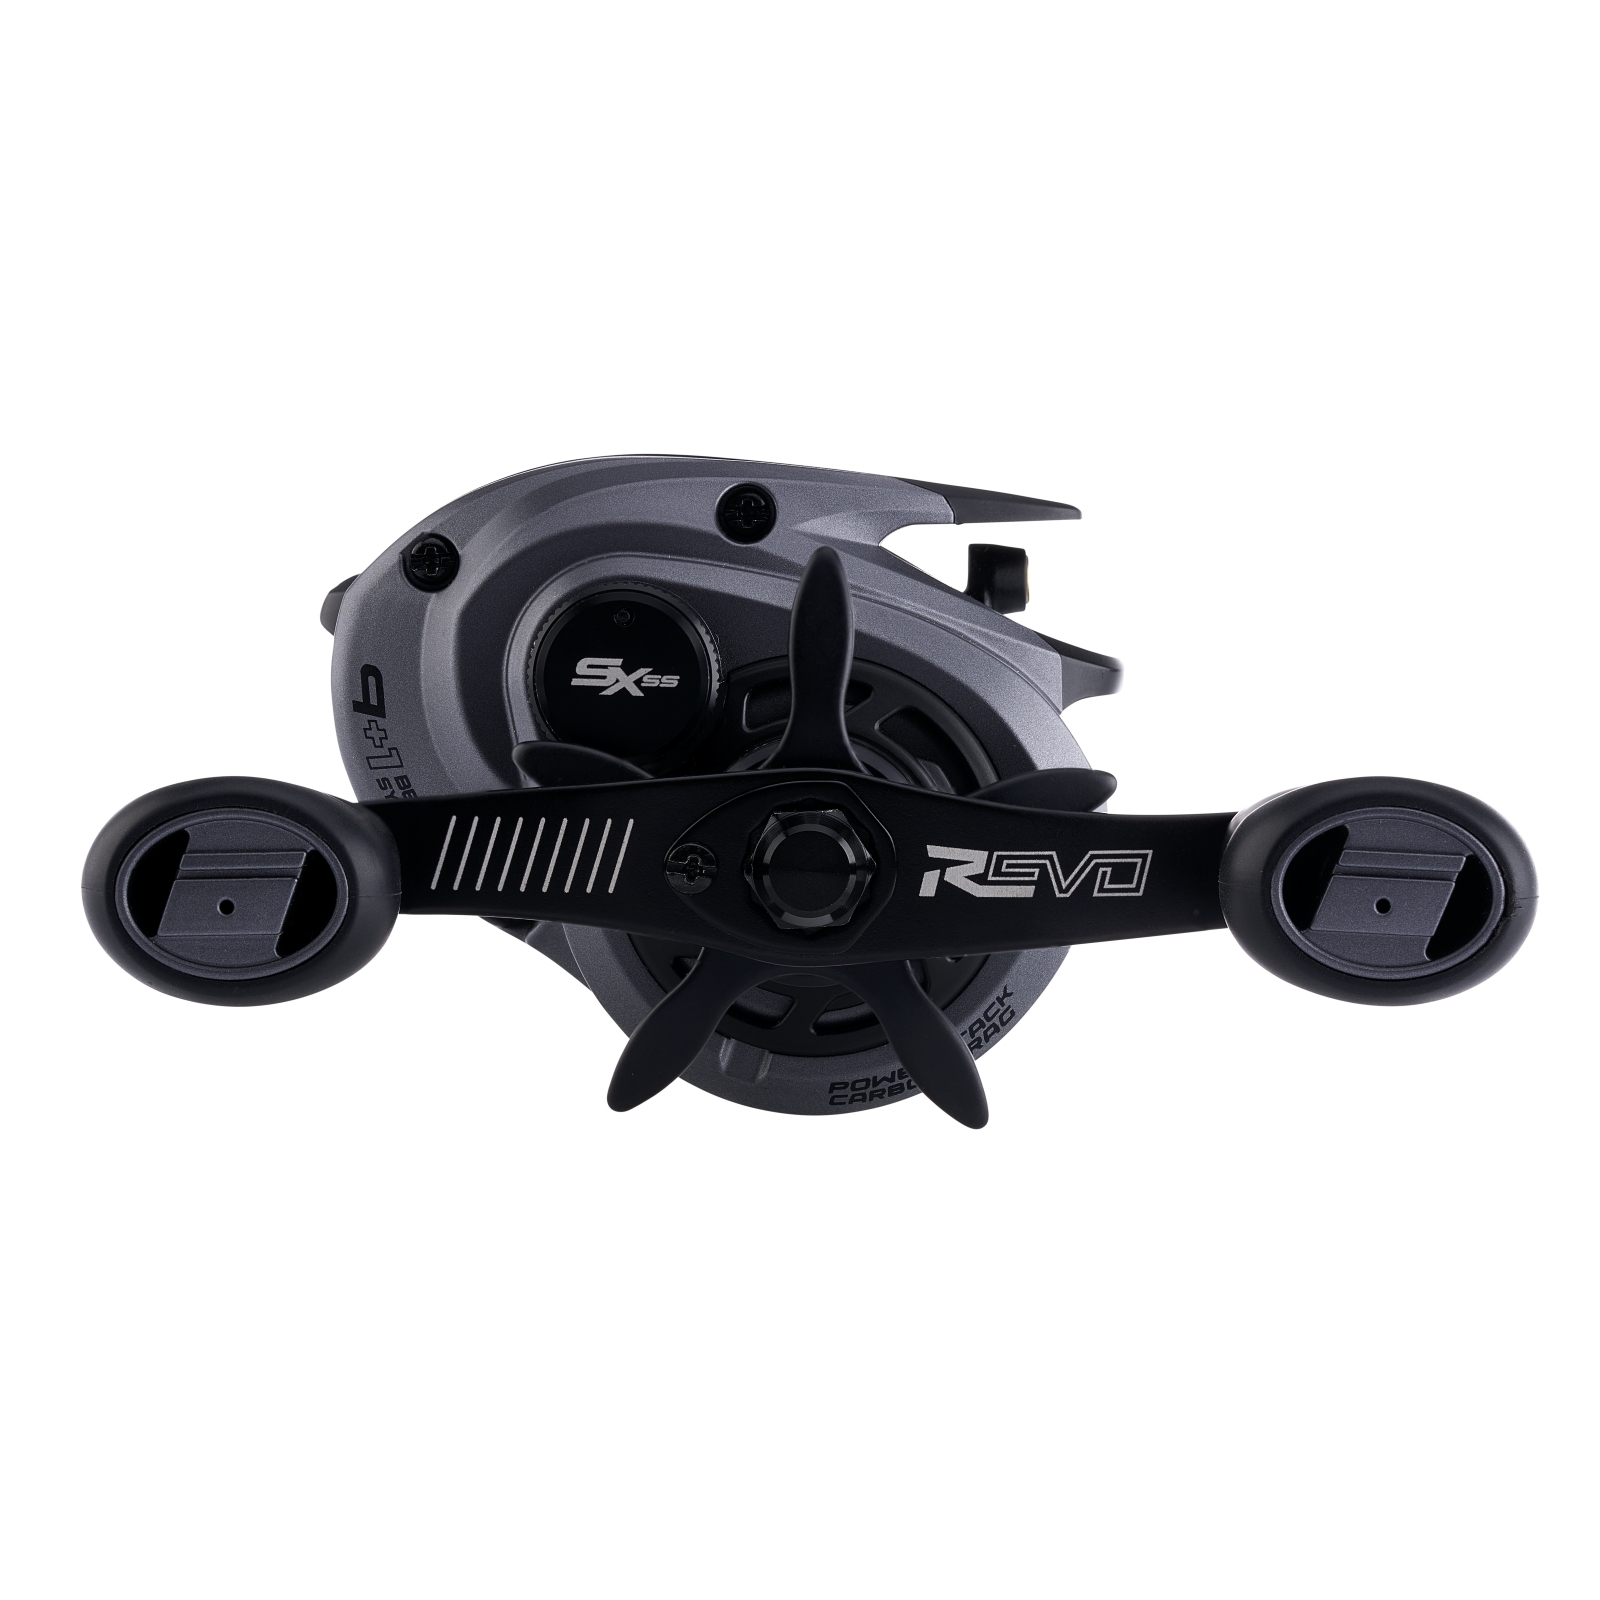 New from Abu Garcia: The Revo SX-SS Low Profile Casting Reel